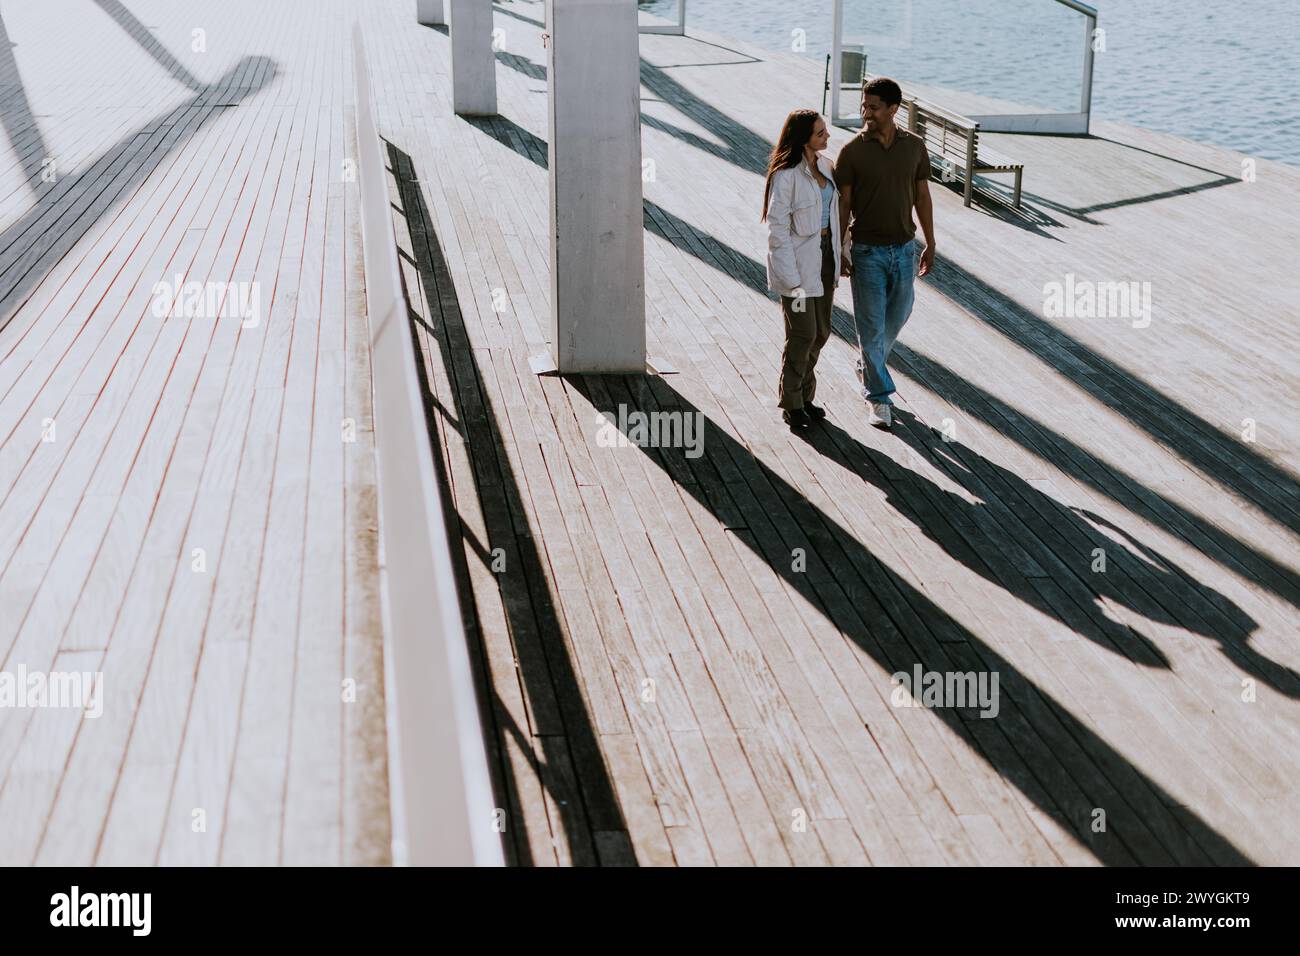 Young couple walks hand in hand, casting long shadows on the wooden ...